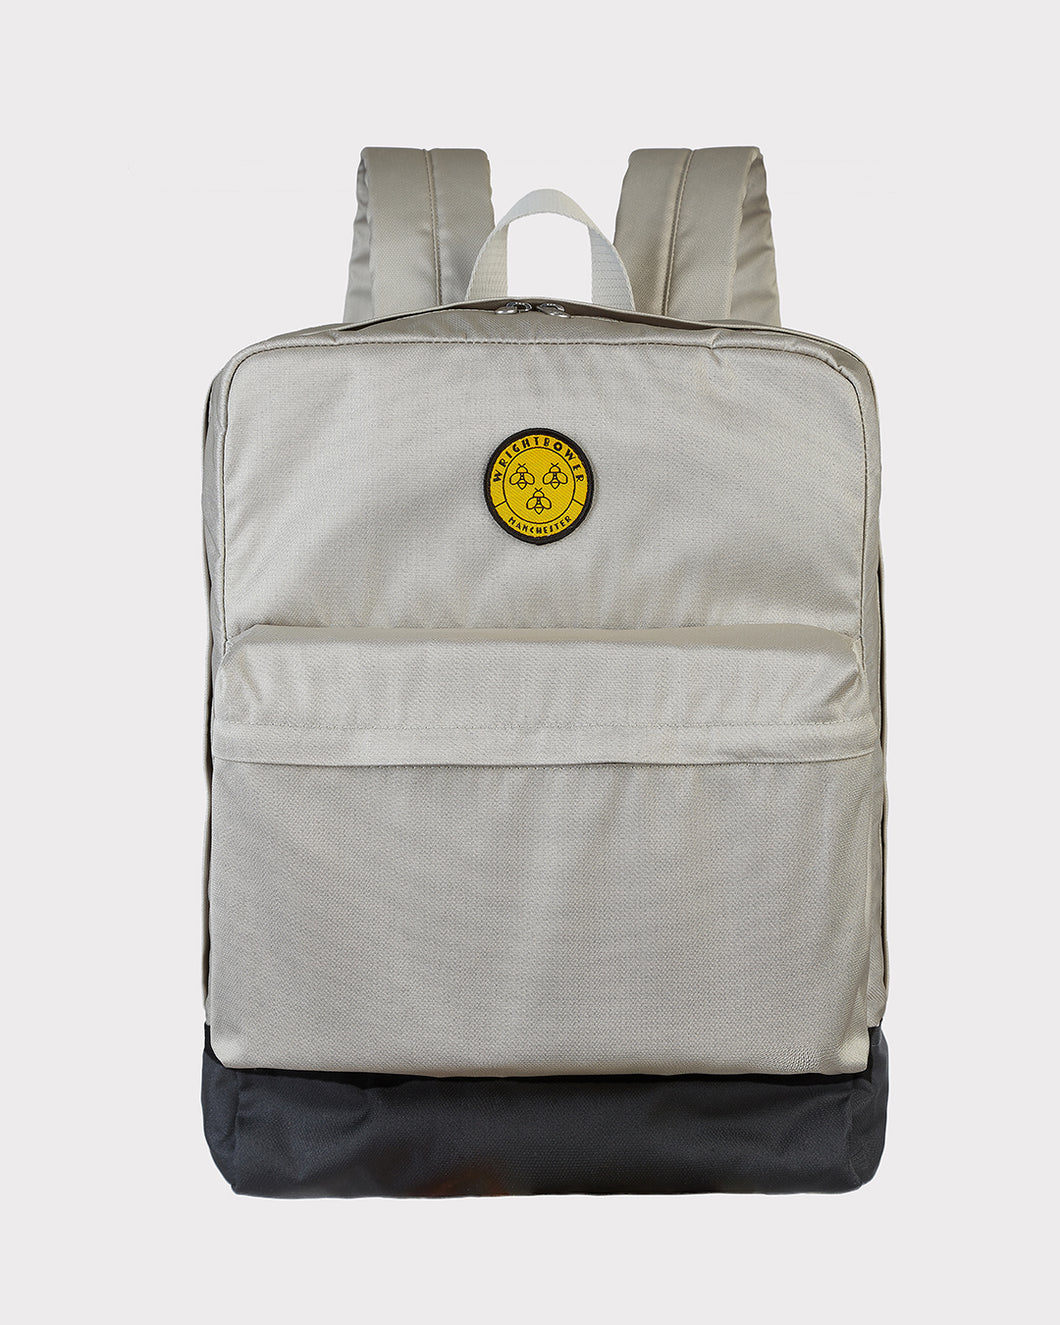 RIO - Classic Backpack in ICE GREY TWO TONE